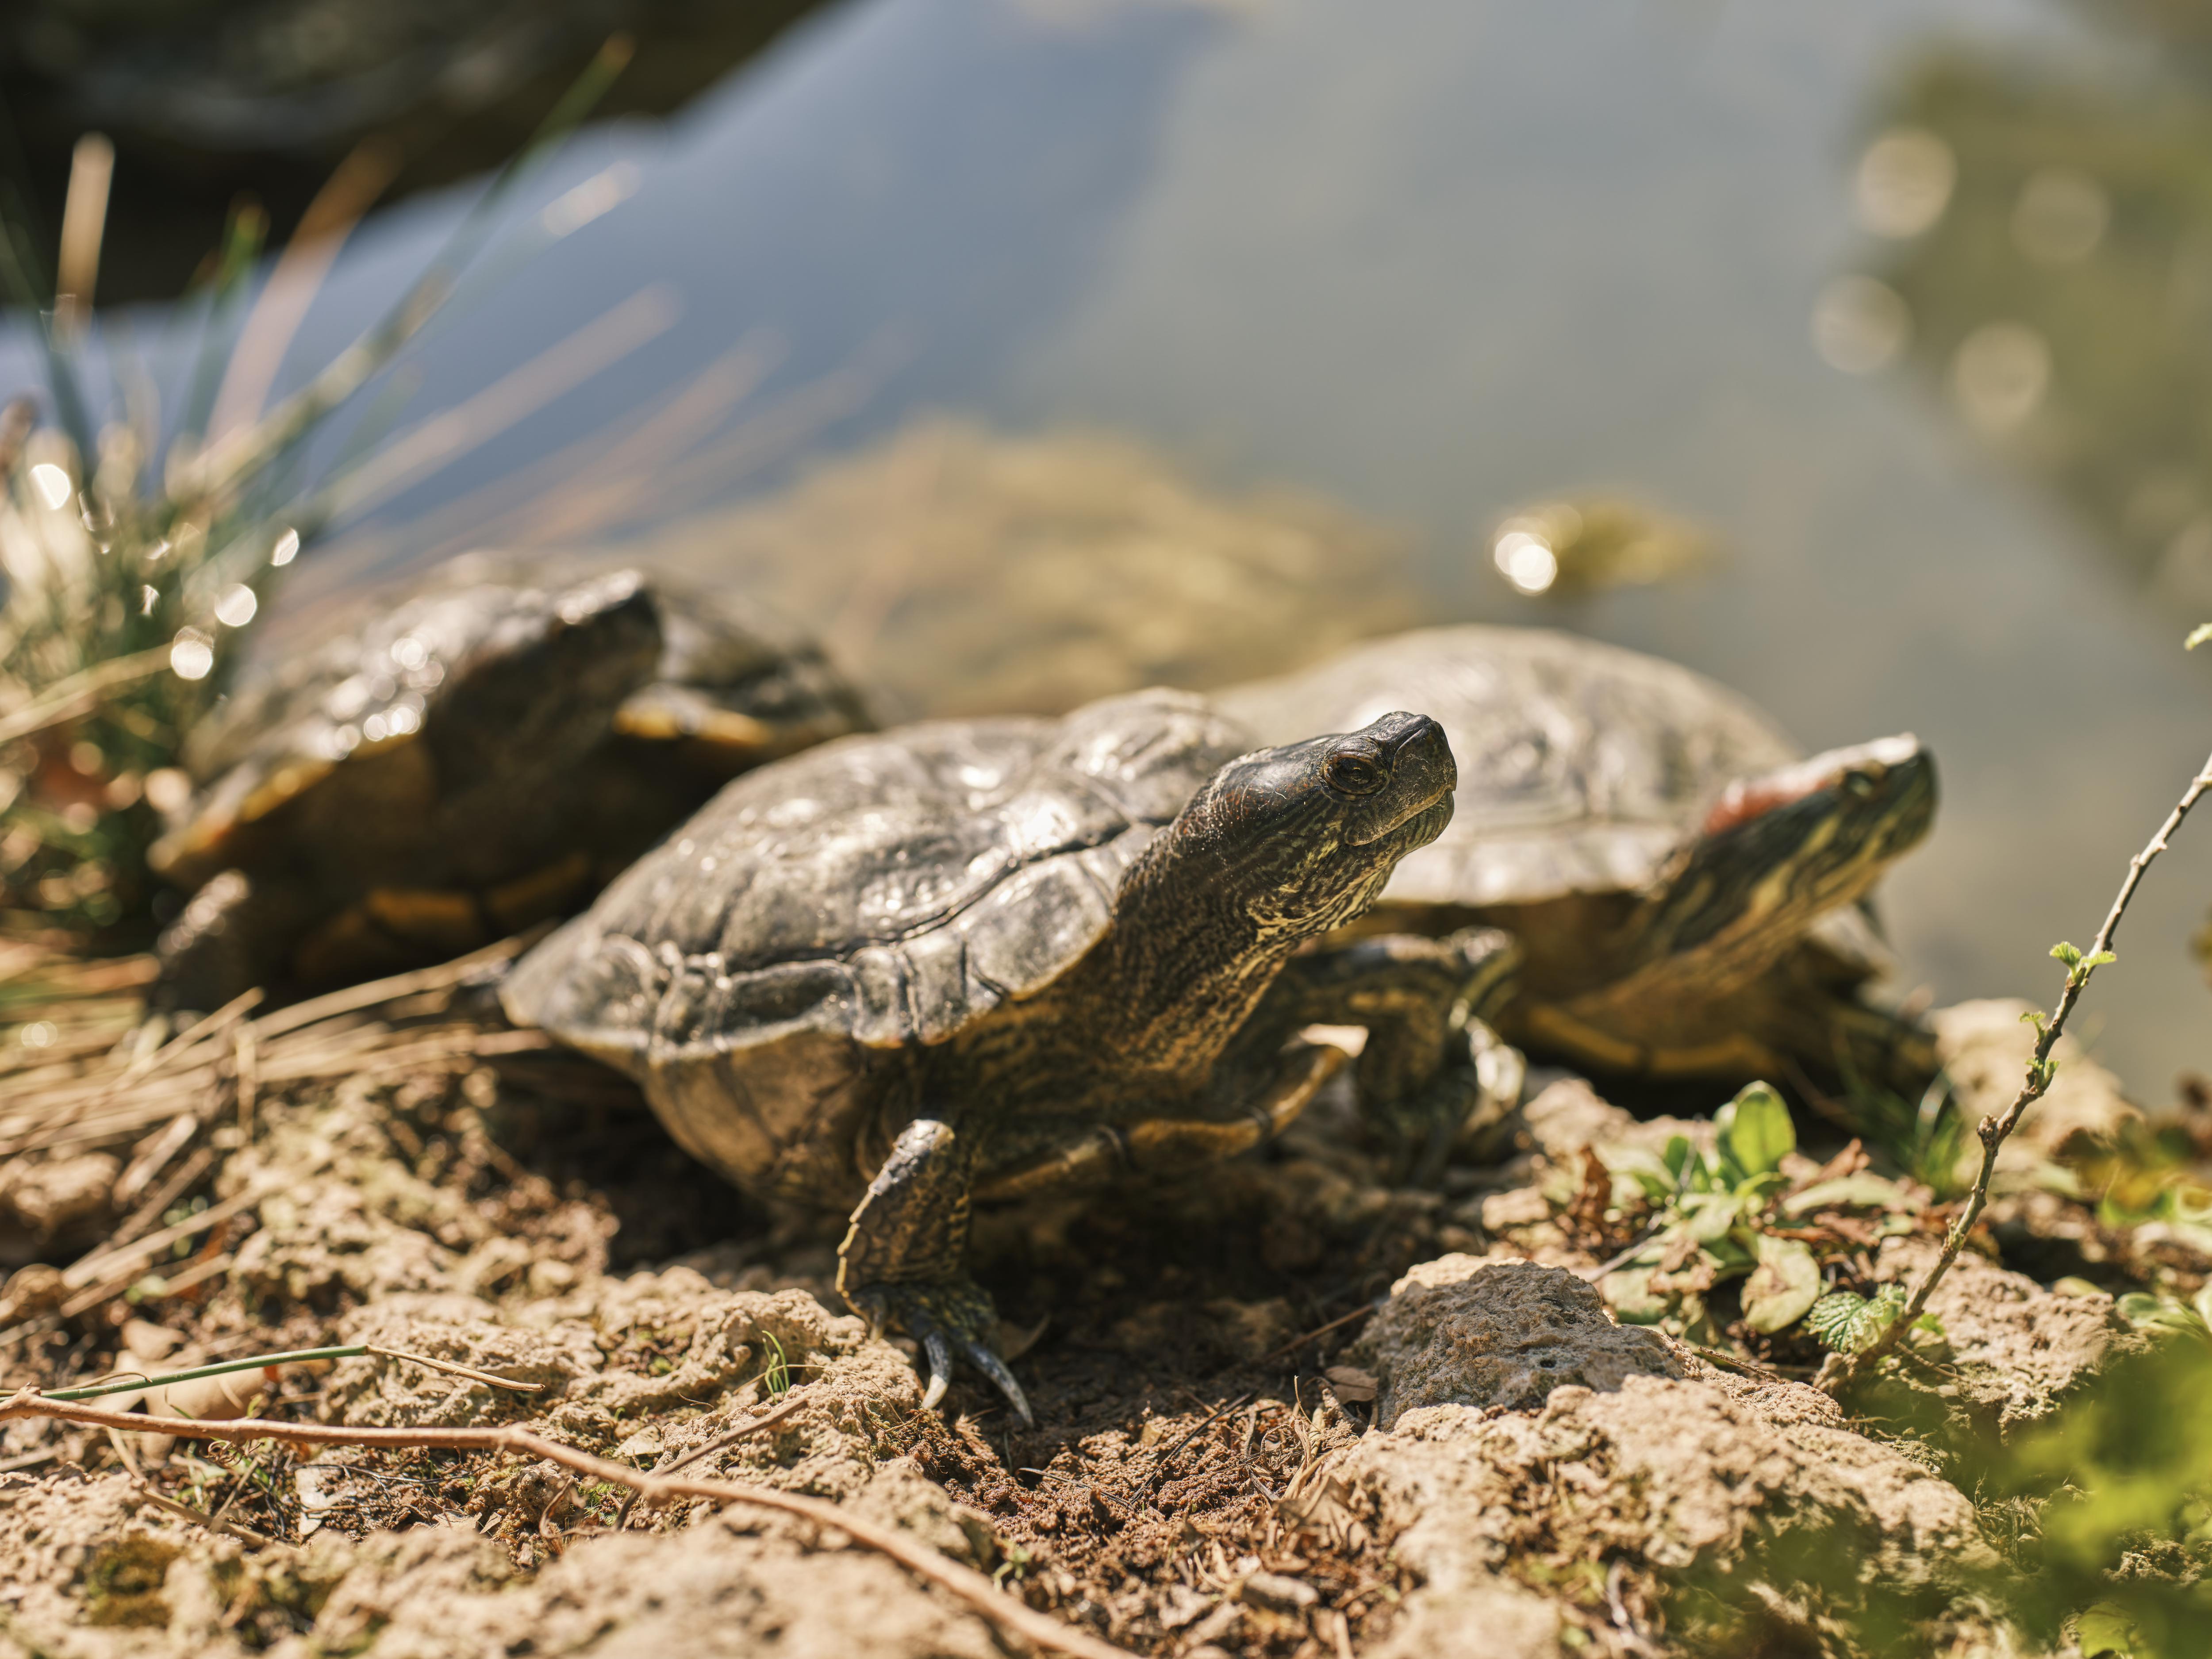 Nutritional needs of red eared slider turtles